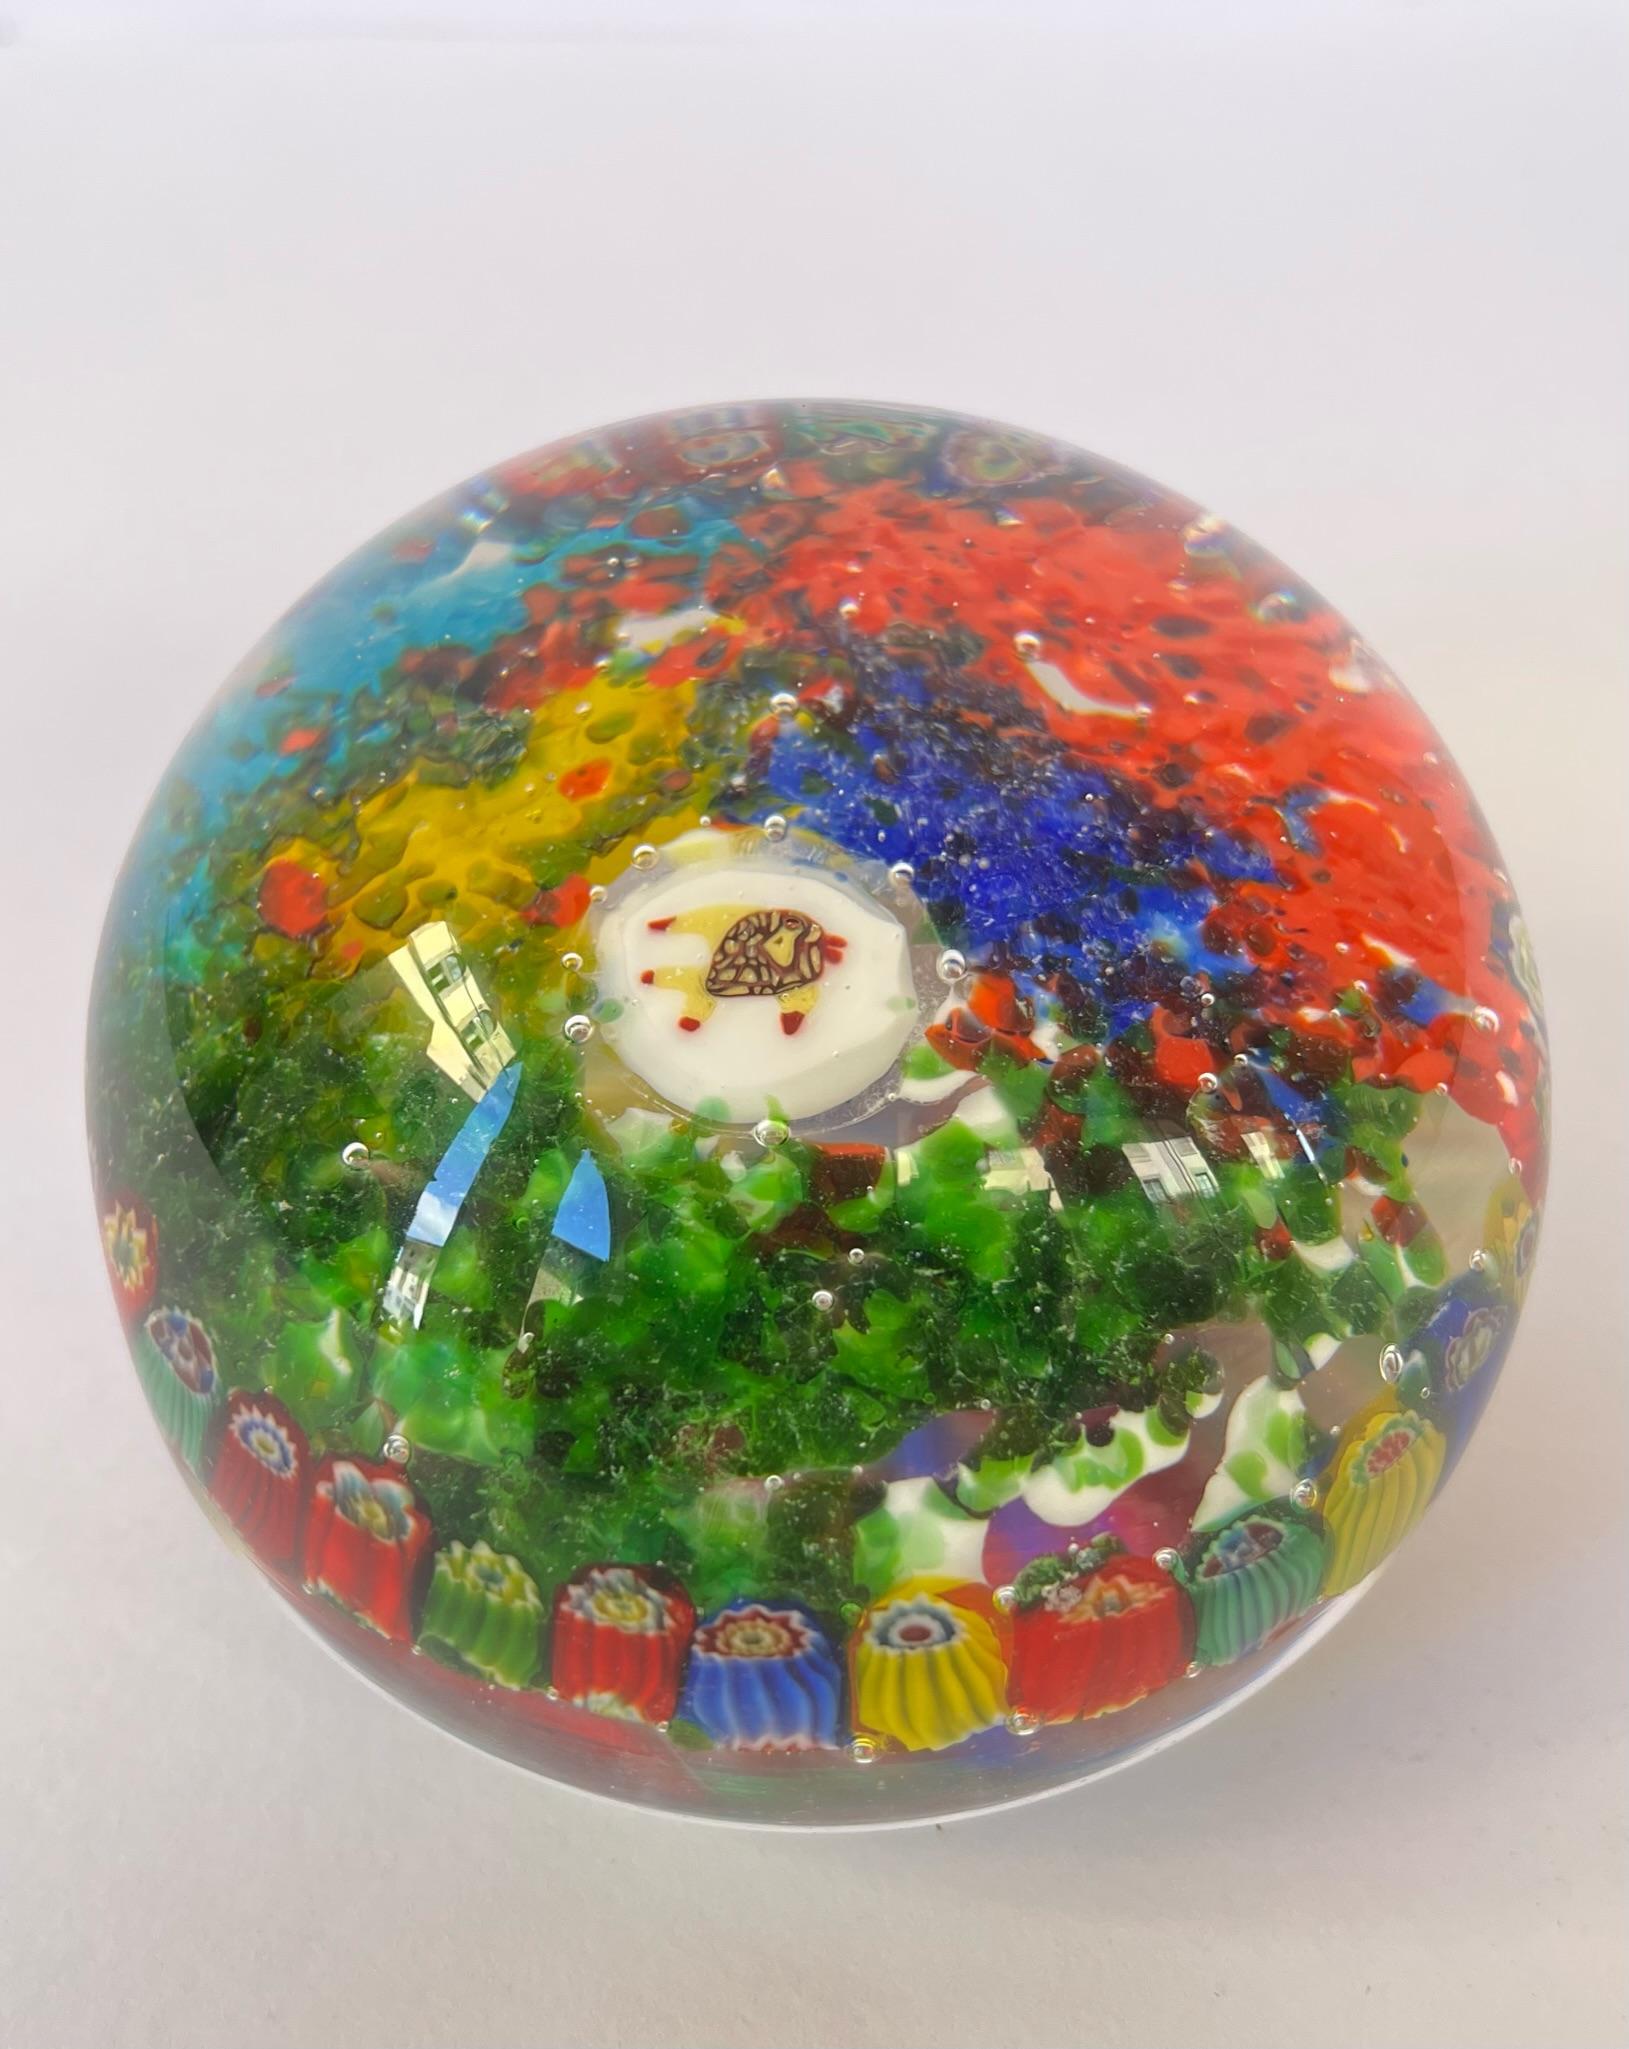 Very rare Presse Papier of Dino Martens 1950, with murrine inside and a murrine of a stylized fish in the central part.
This eye-catching presse papier is full of details. The interior part is in shades of a multicolor murrine with a spectacular